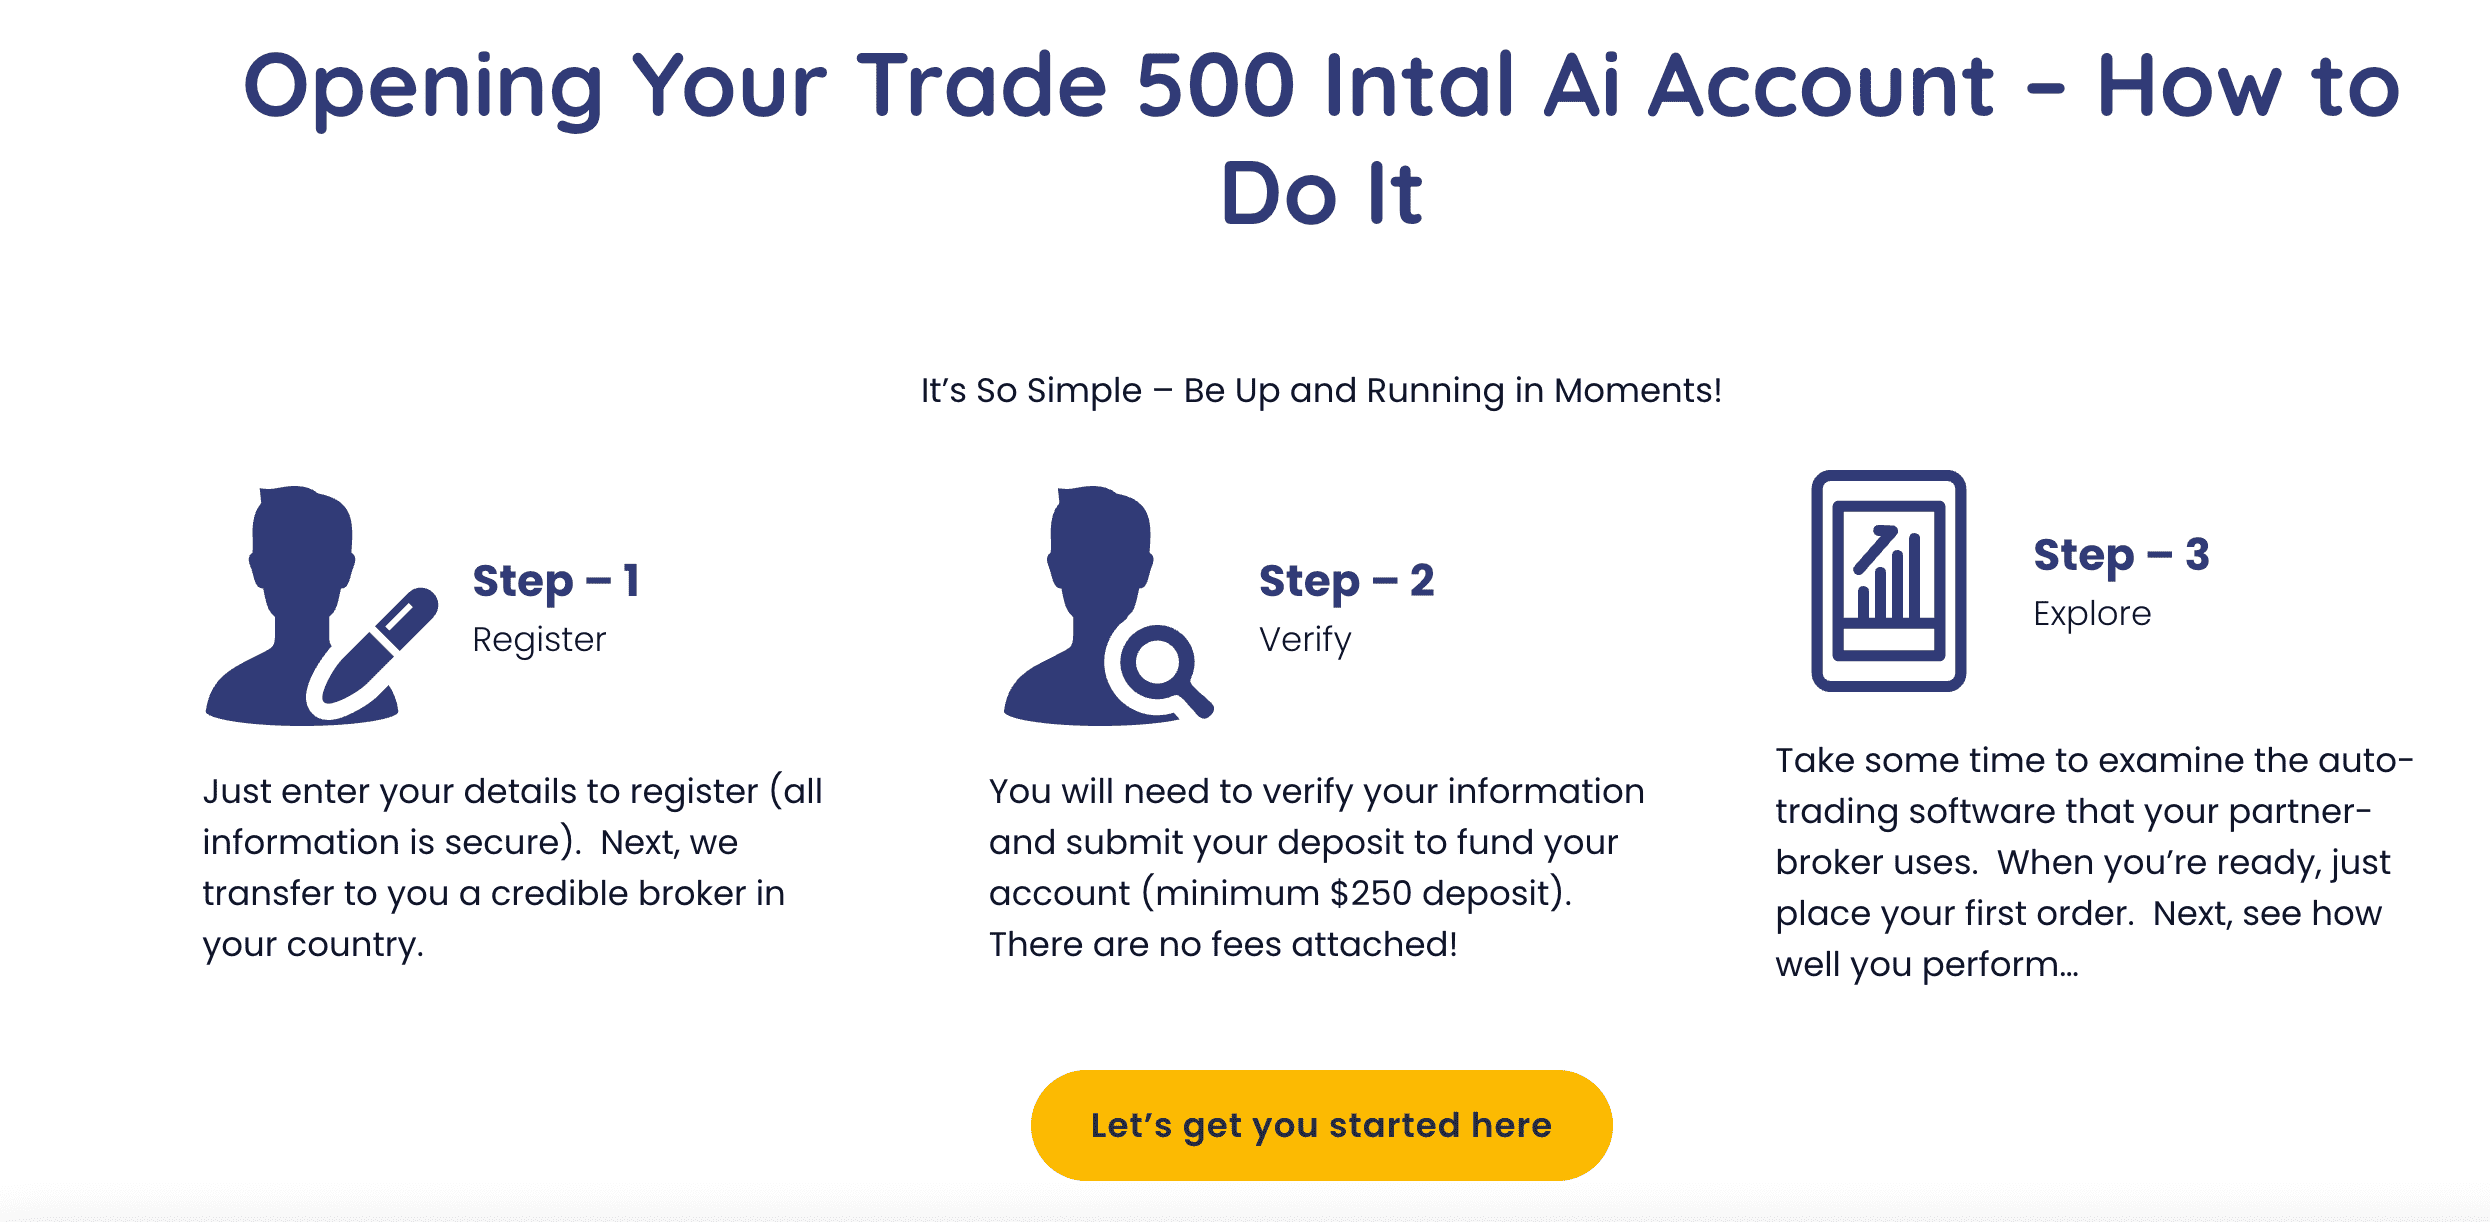 Opening Your Trade Intal Ai Account – How to Do It
